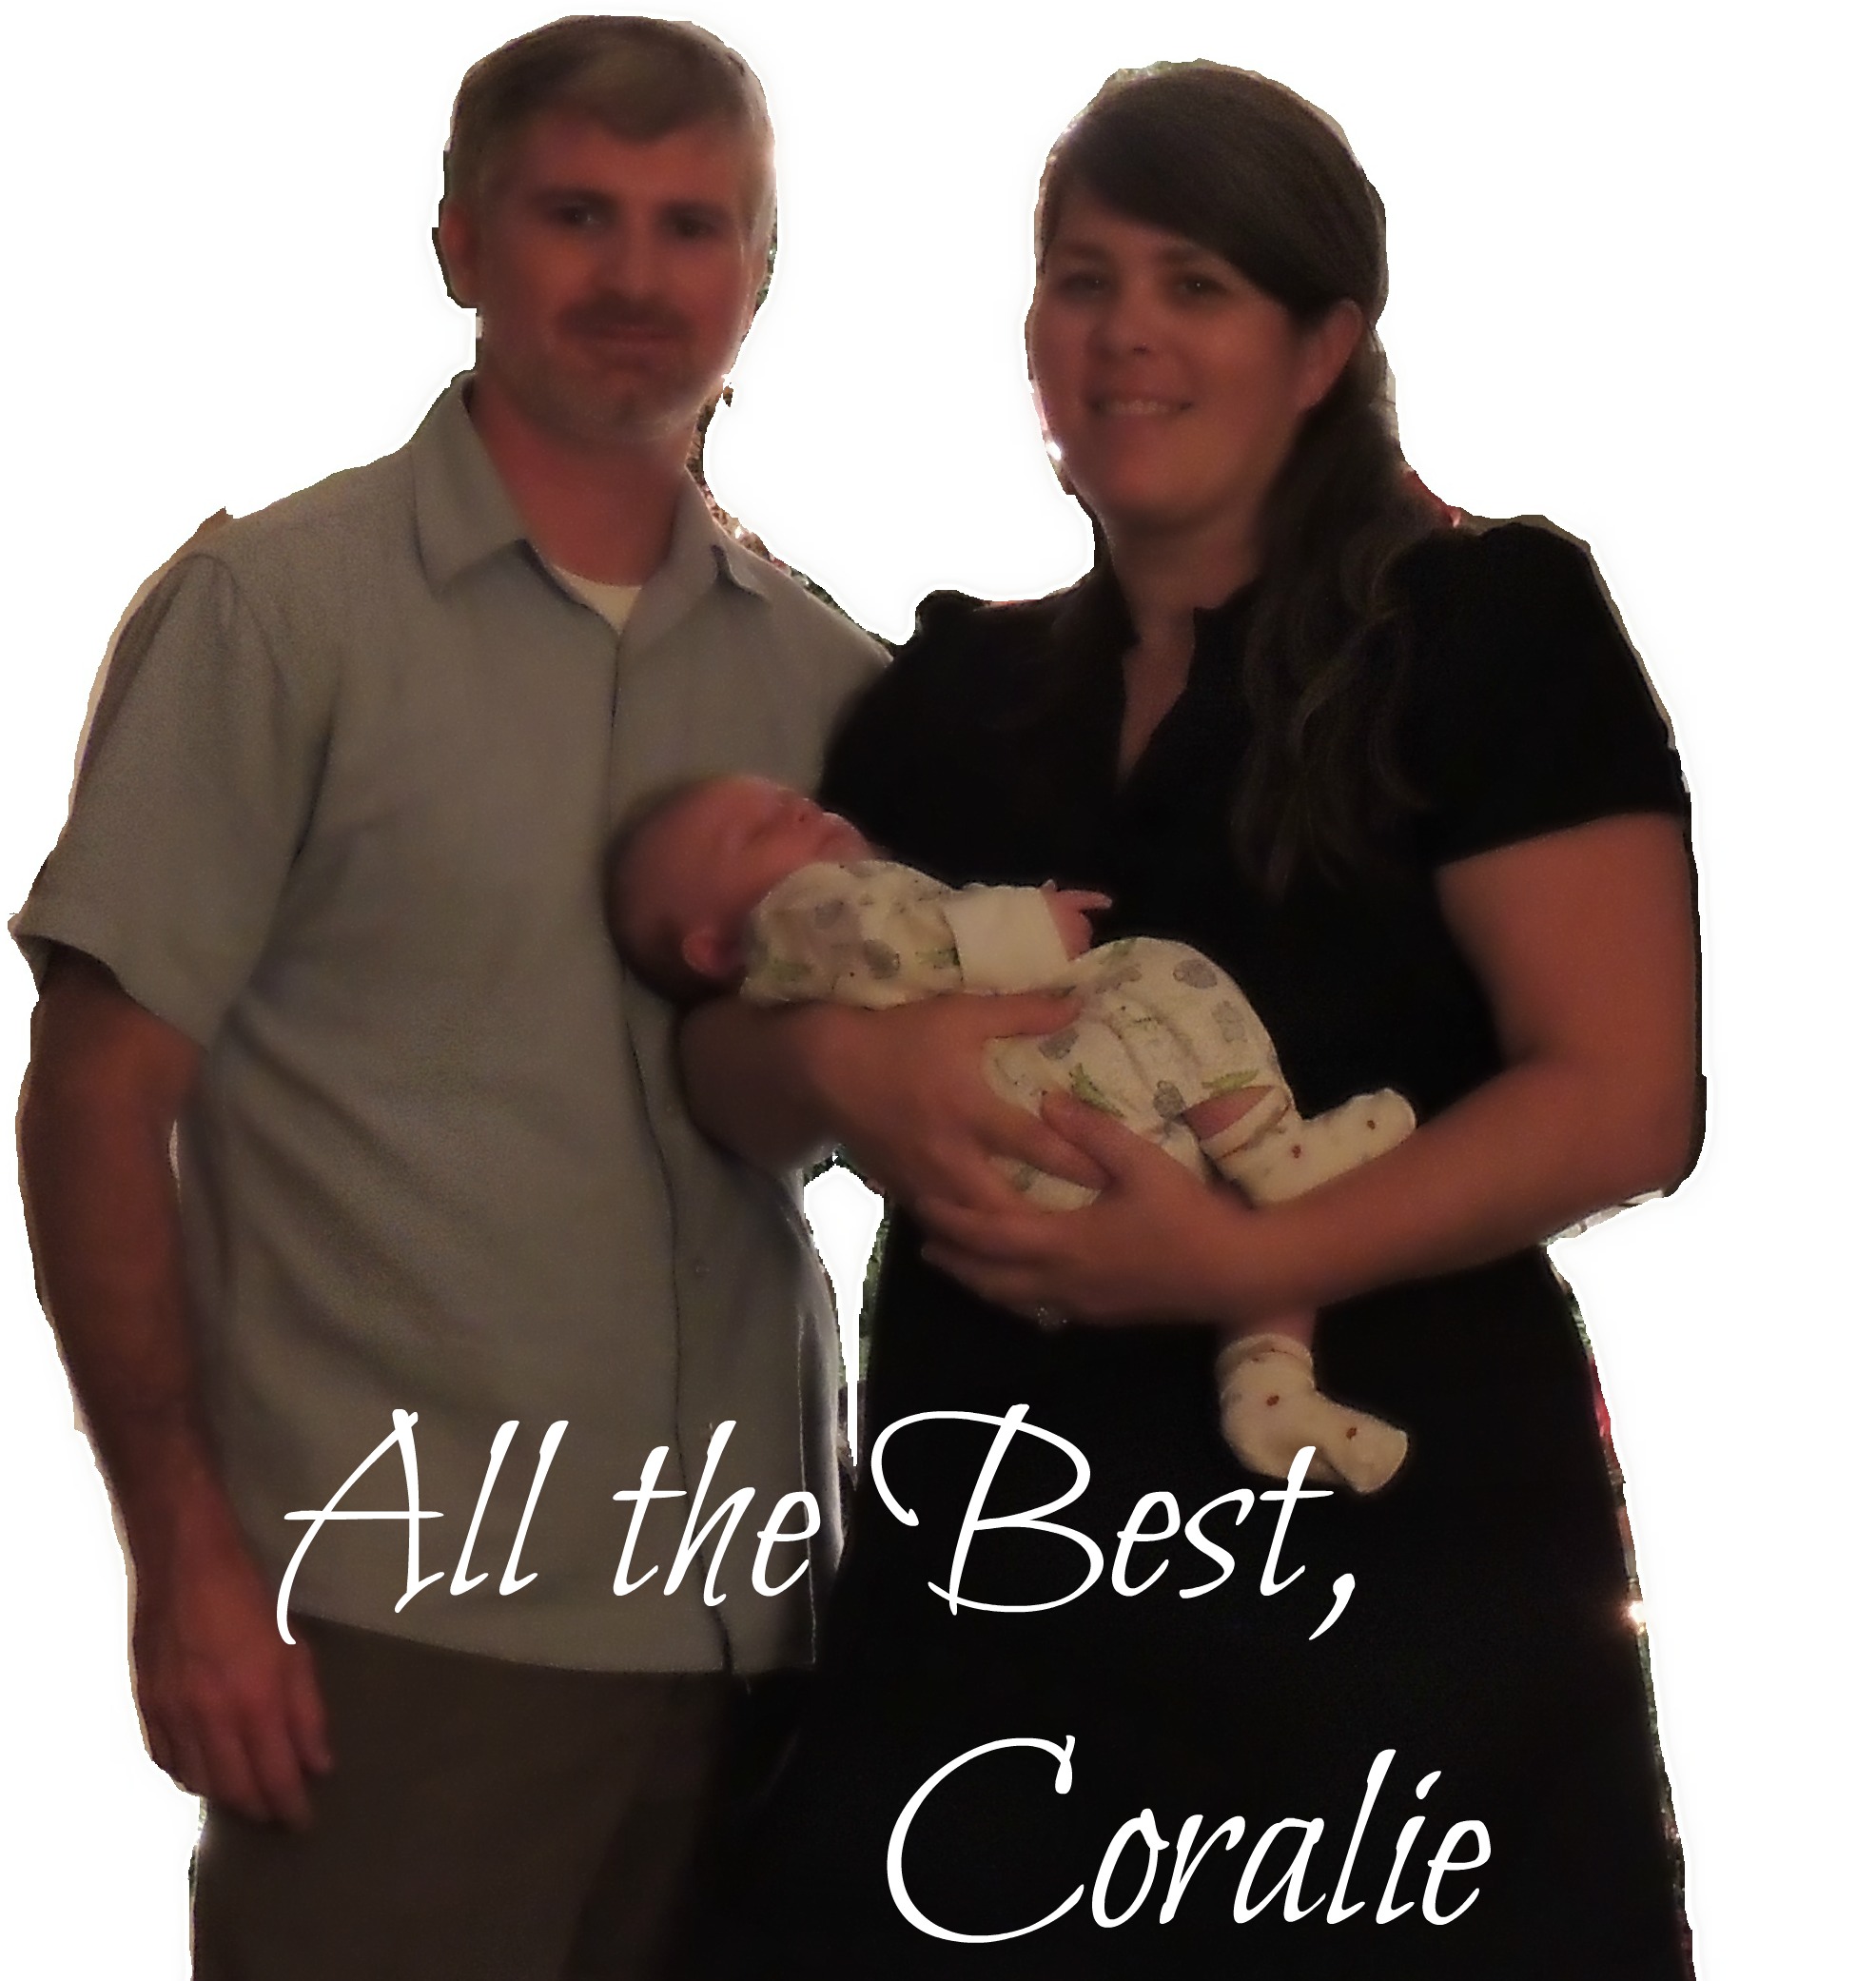 All the Best, Coralie